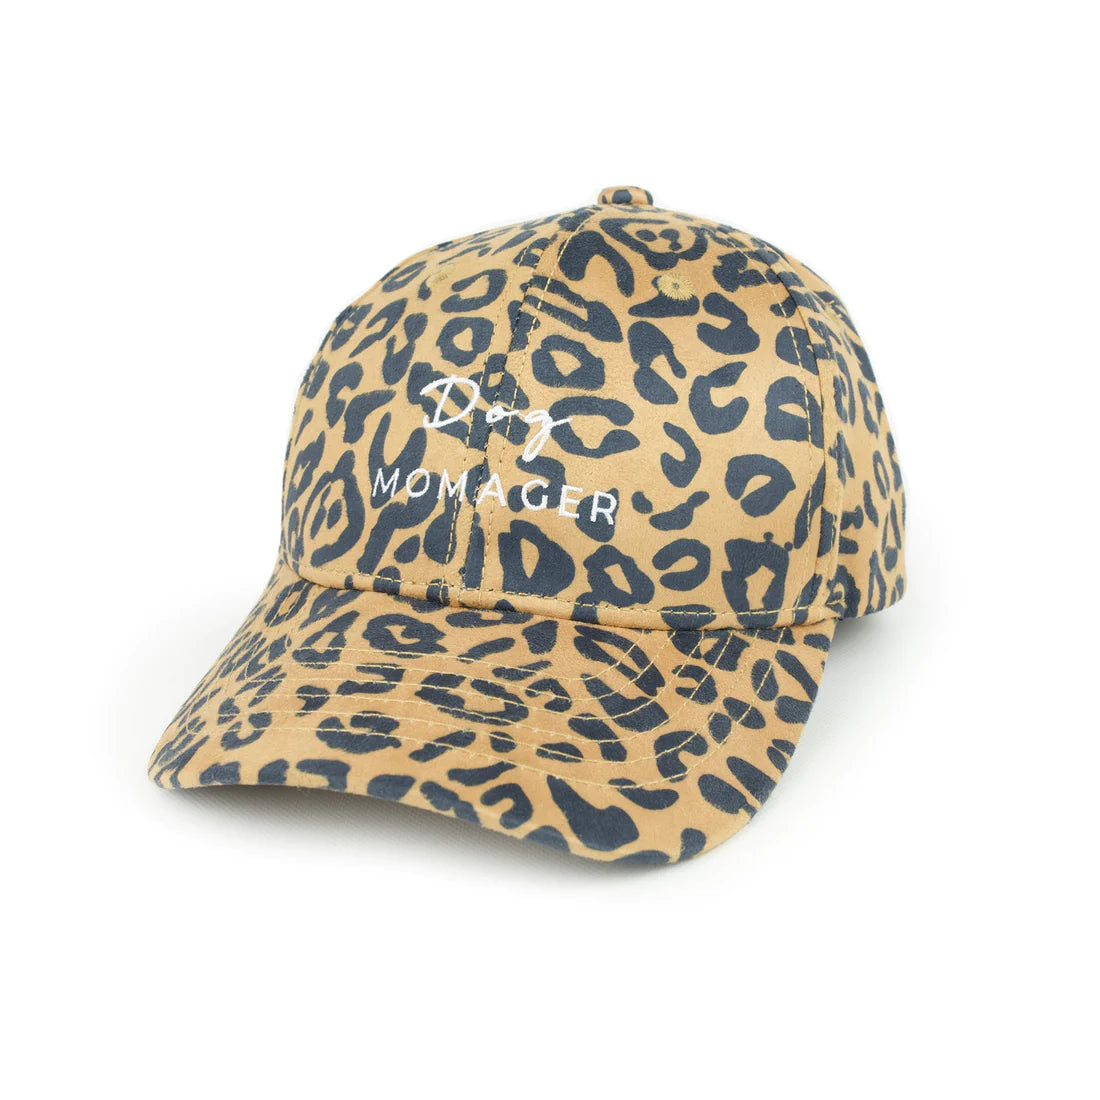 Cap | Holly & Co's Dog Momager Leopard